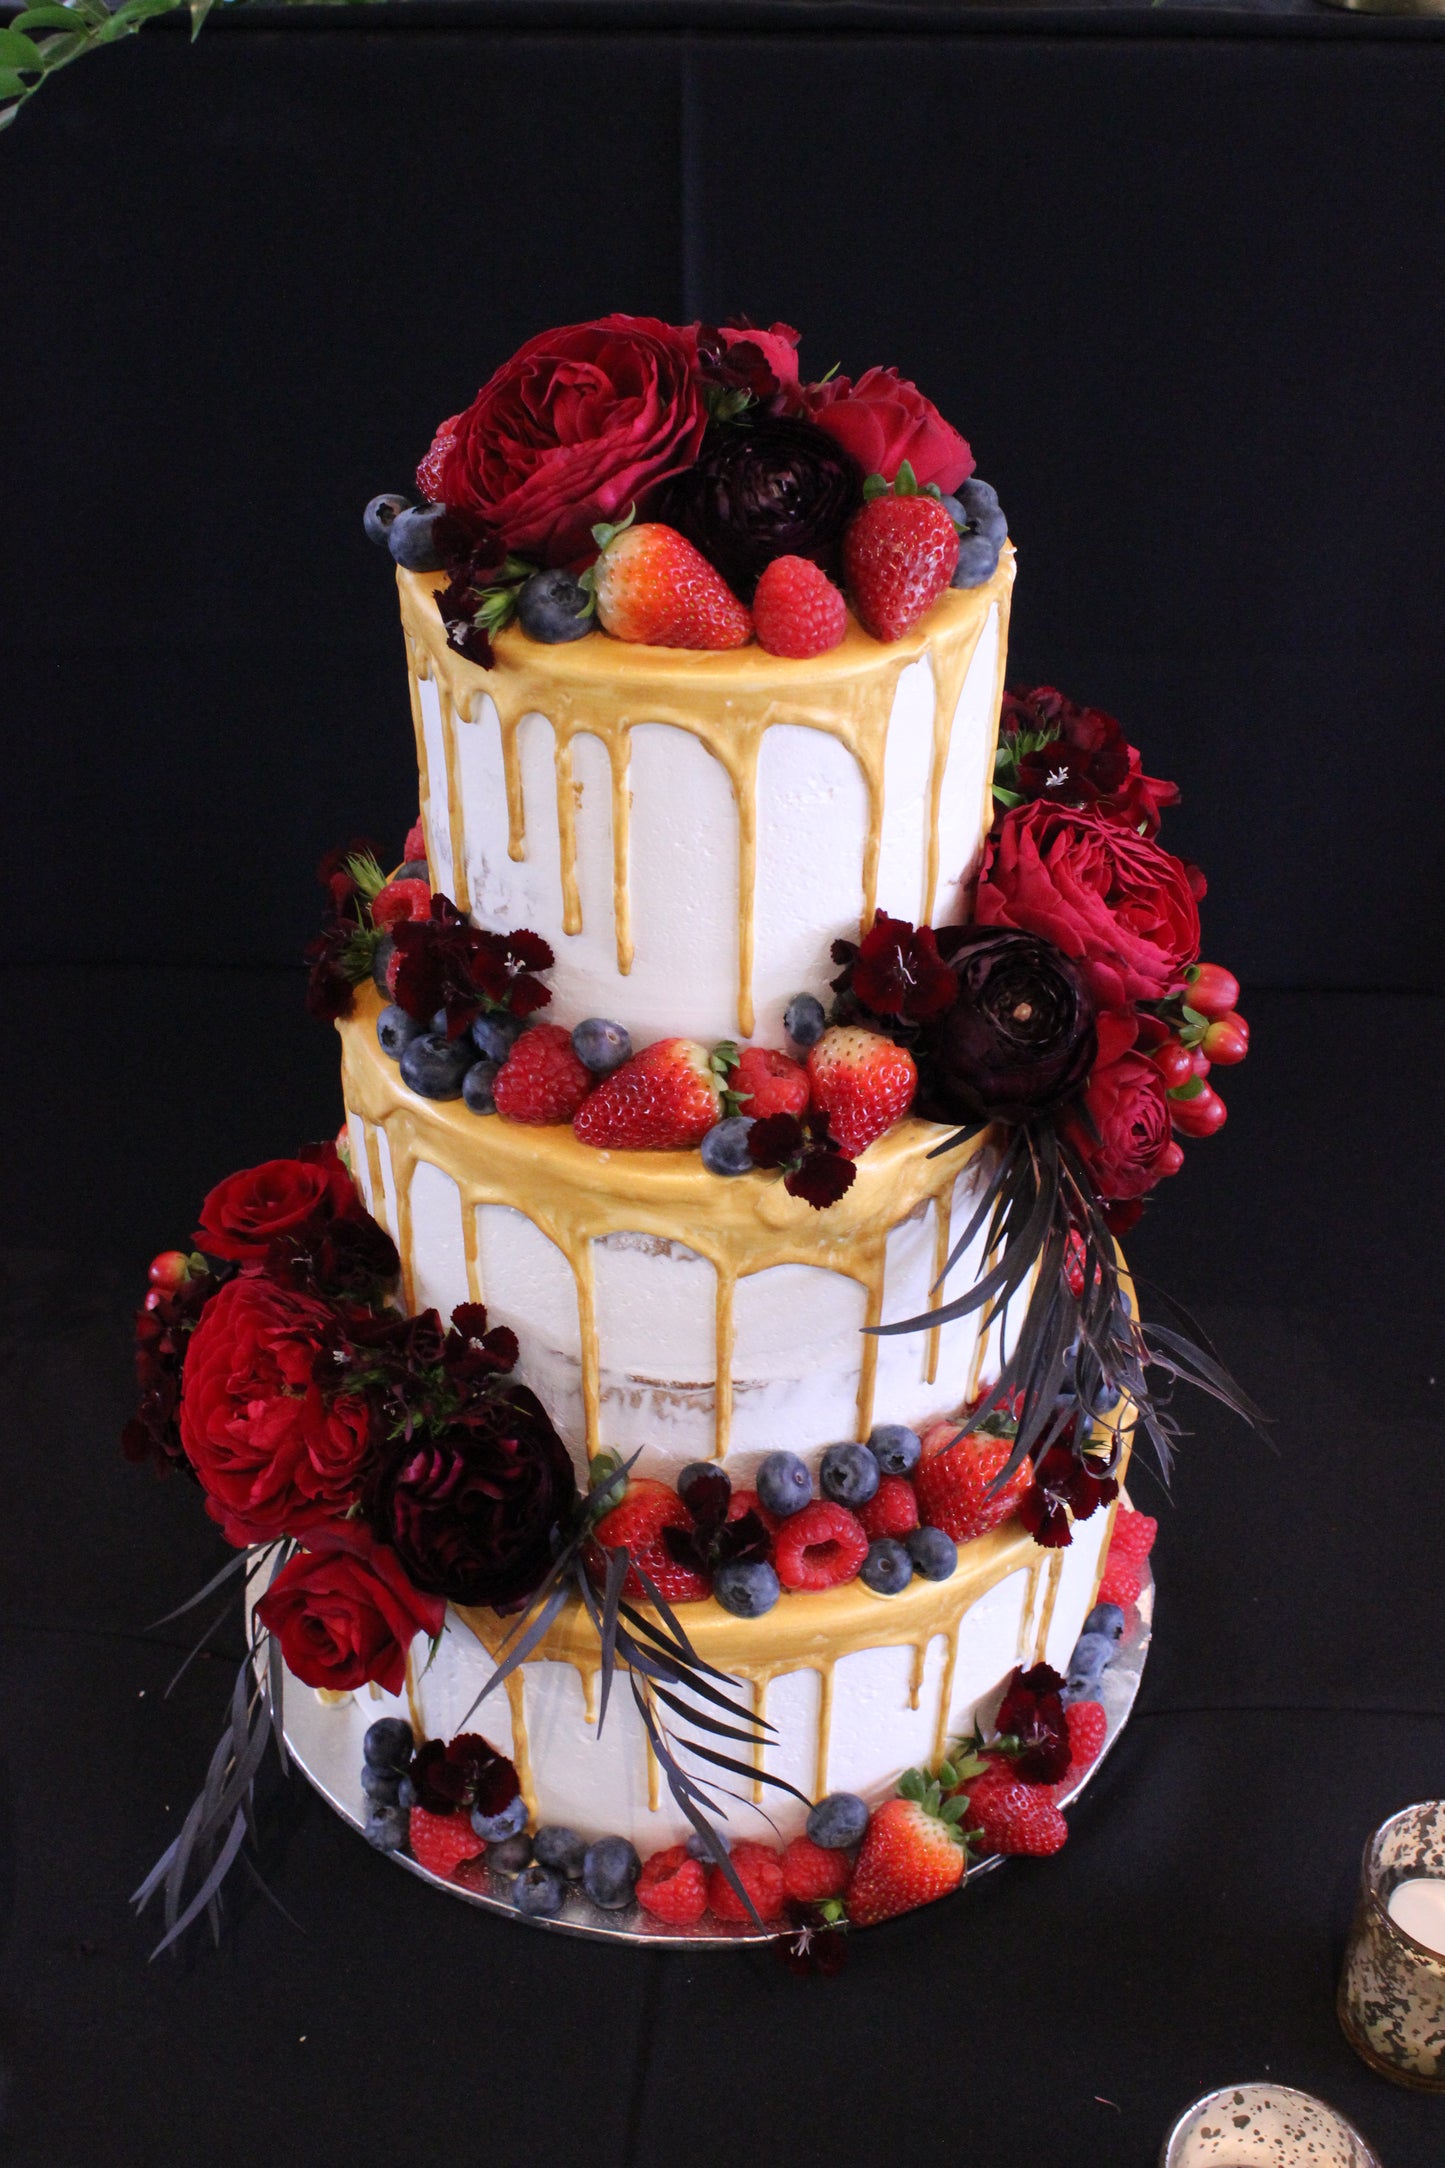 3 tier Gold Drizzle Cake with Red Flowers & Berries